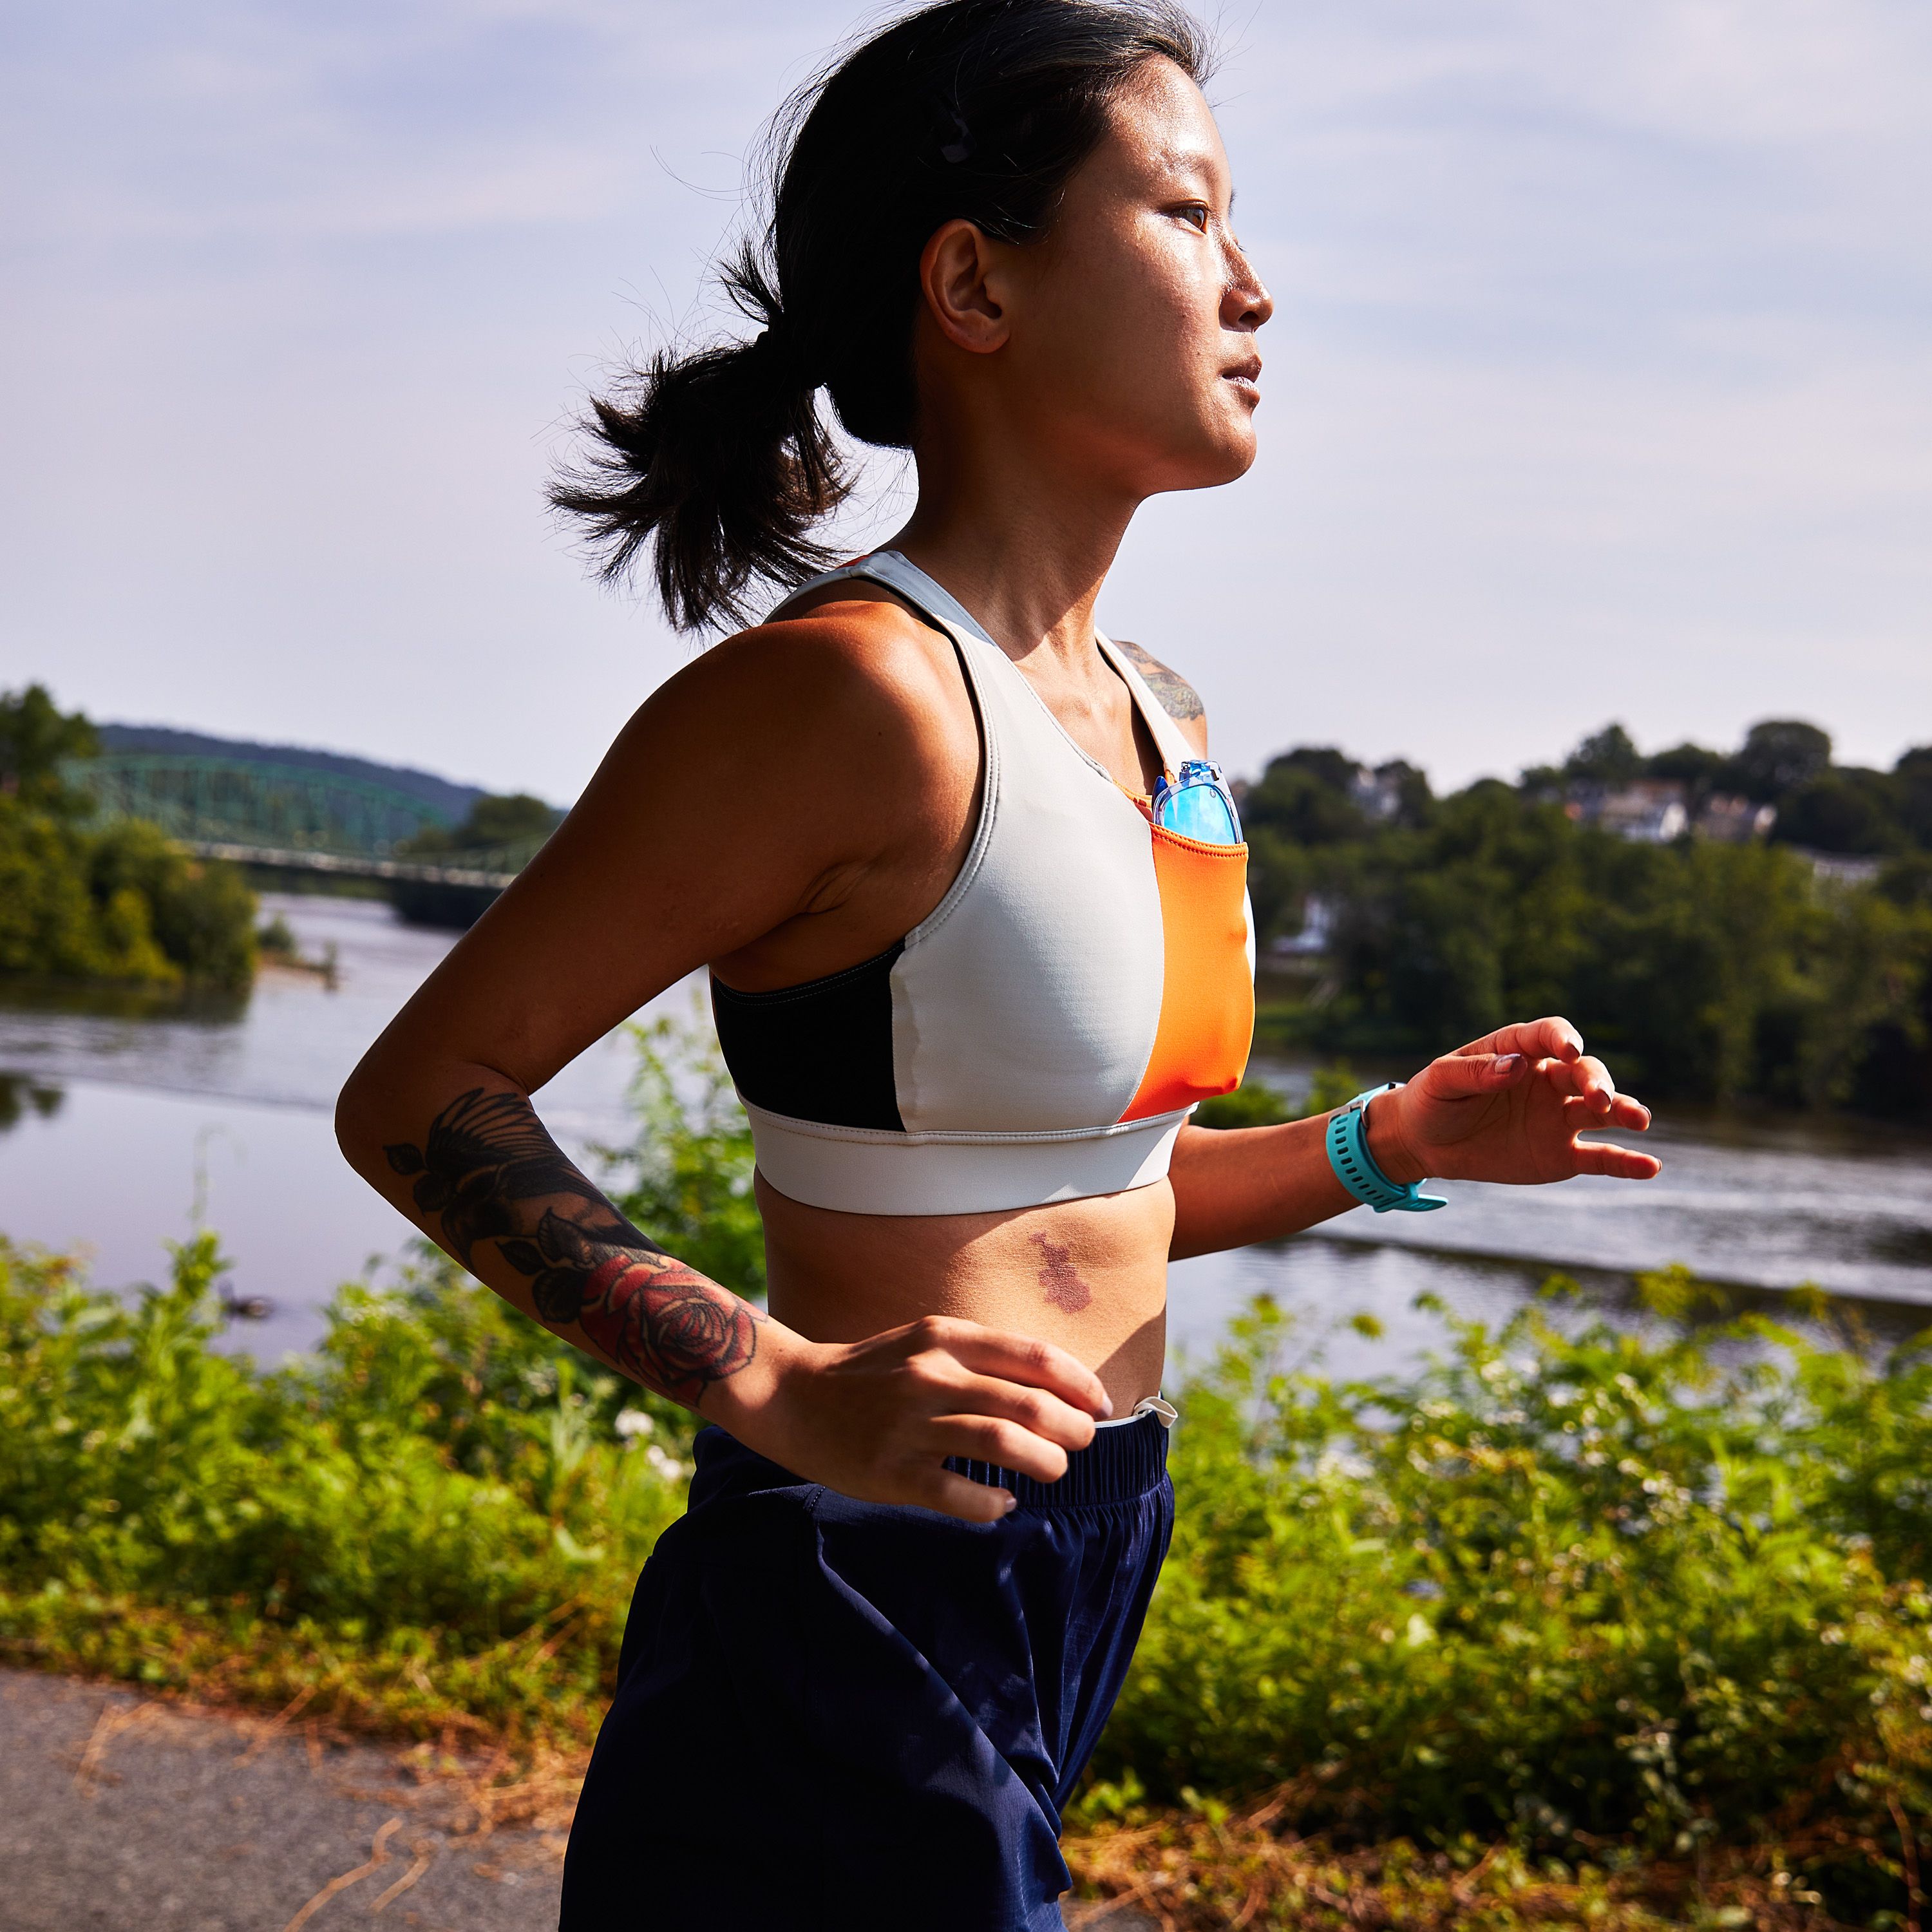 Sports Bra and Running Performance: Why You Need the Right Bra